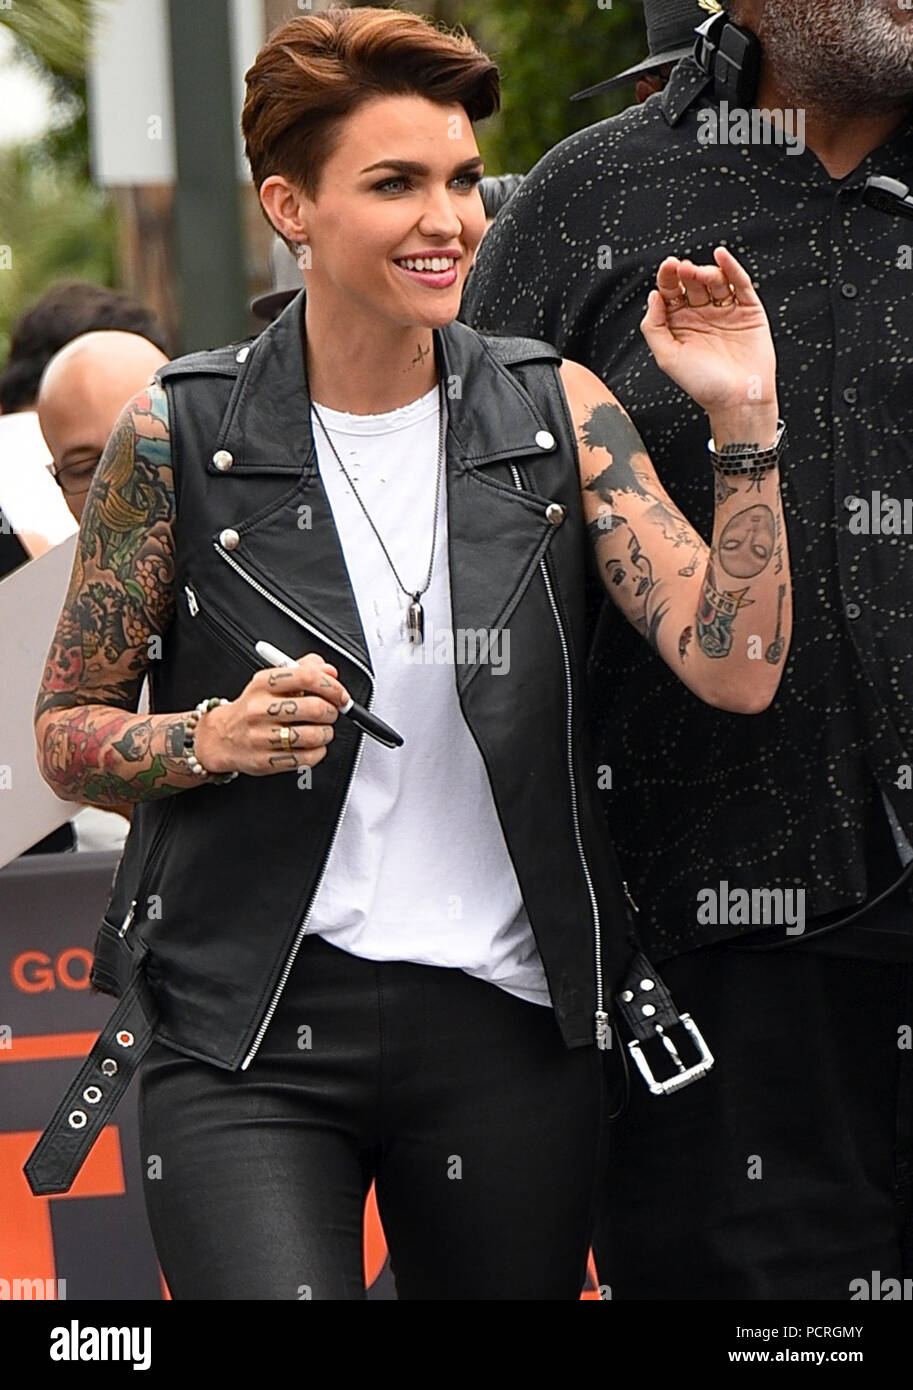 UNIVERSAL CITY, CA - JULY 08: Ruby Rose displays her tattoos at 'Extra' at  Universal Studios Hollywood on July 8, 2015 in Universal City, California.  People: Ruby Rose Langenheim Stock Photo - Alamy